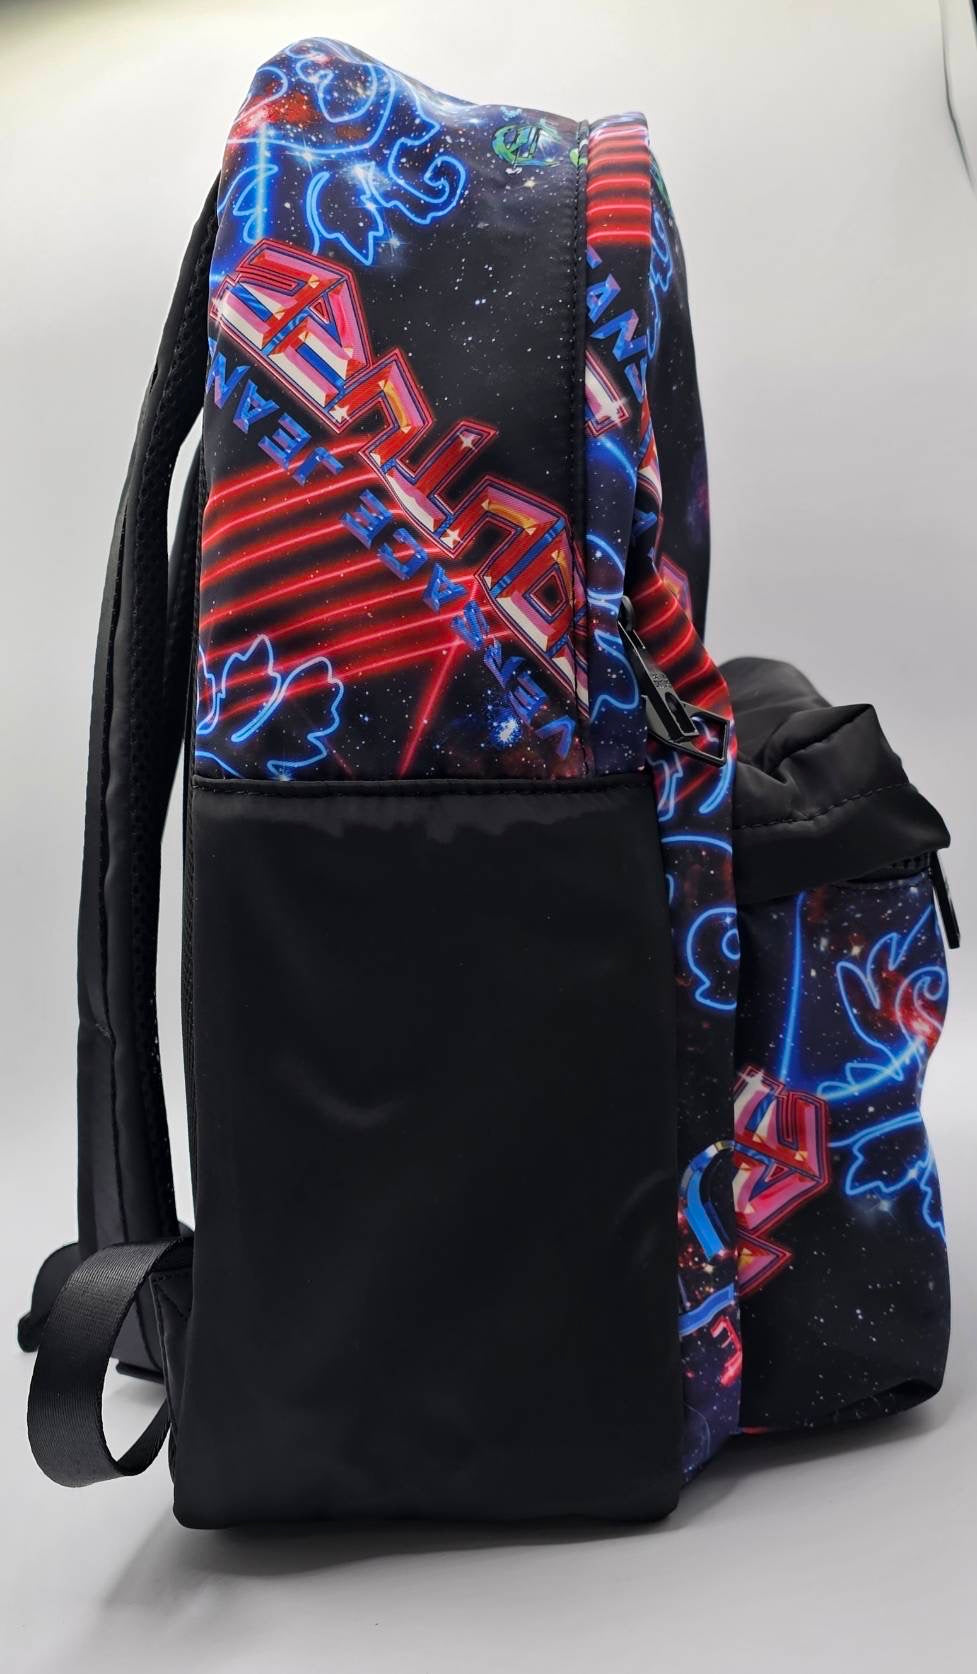 Versace Jeans Couture Logo Space Print Backpack